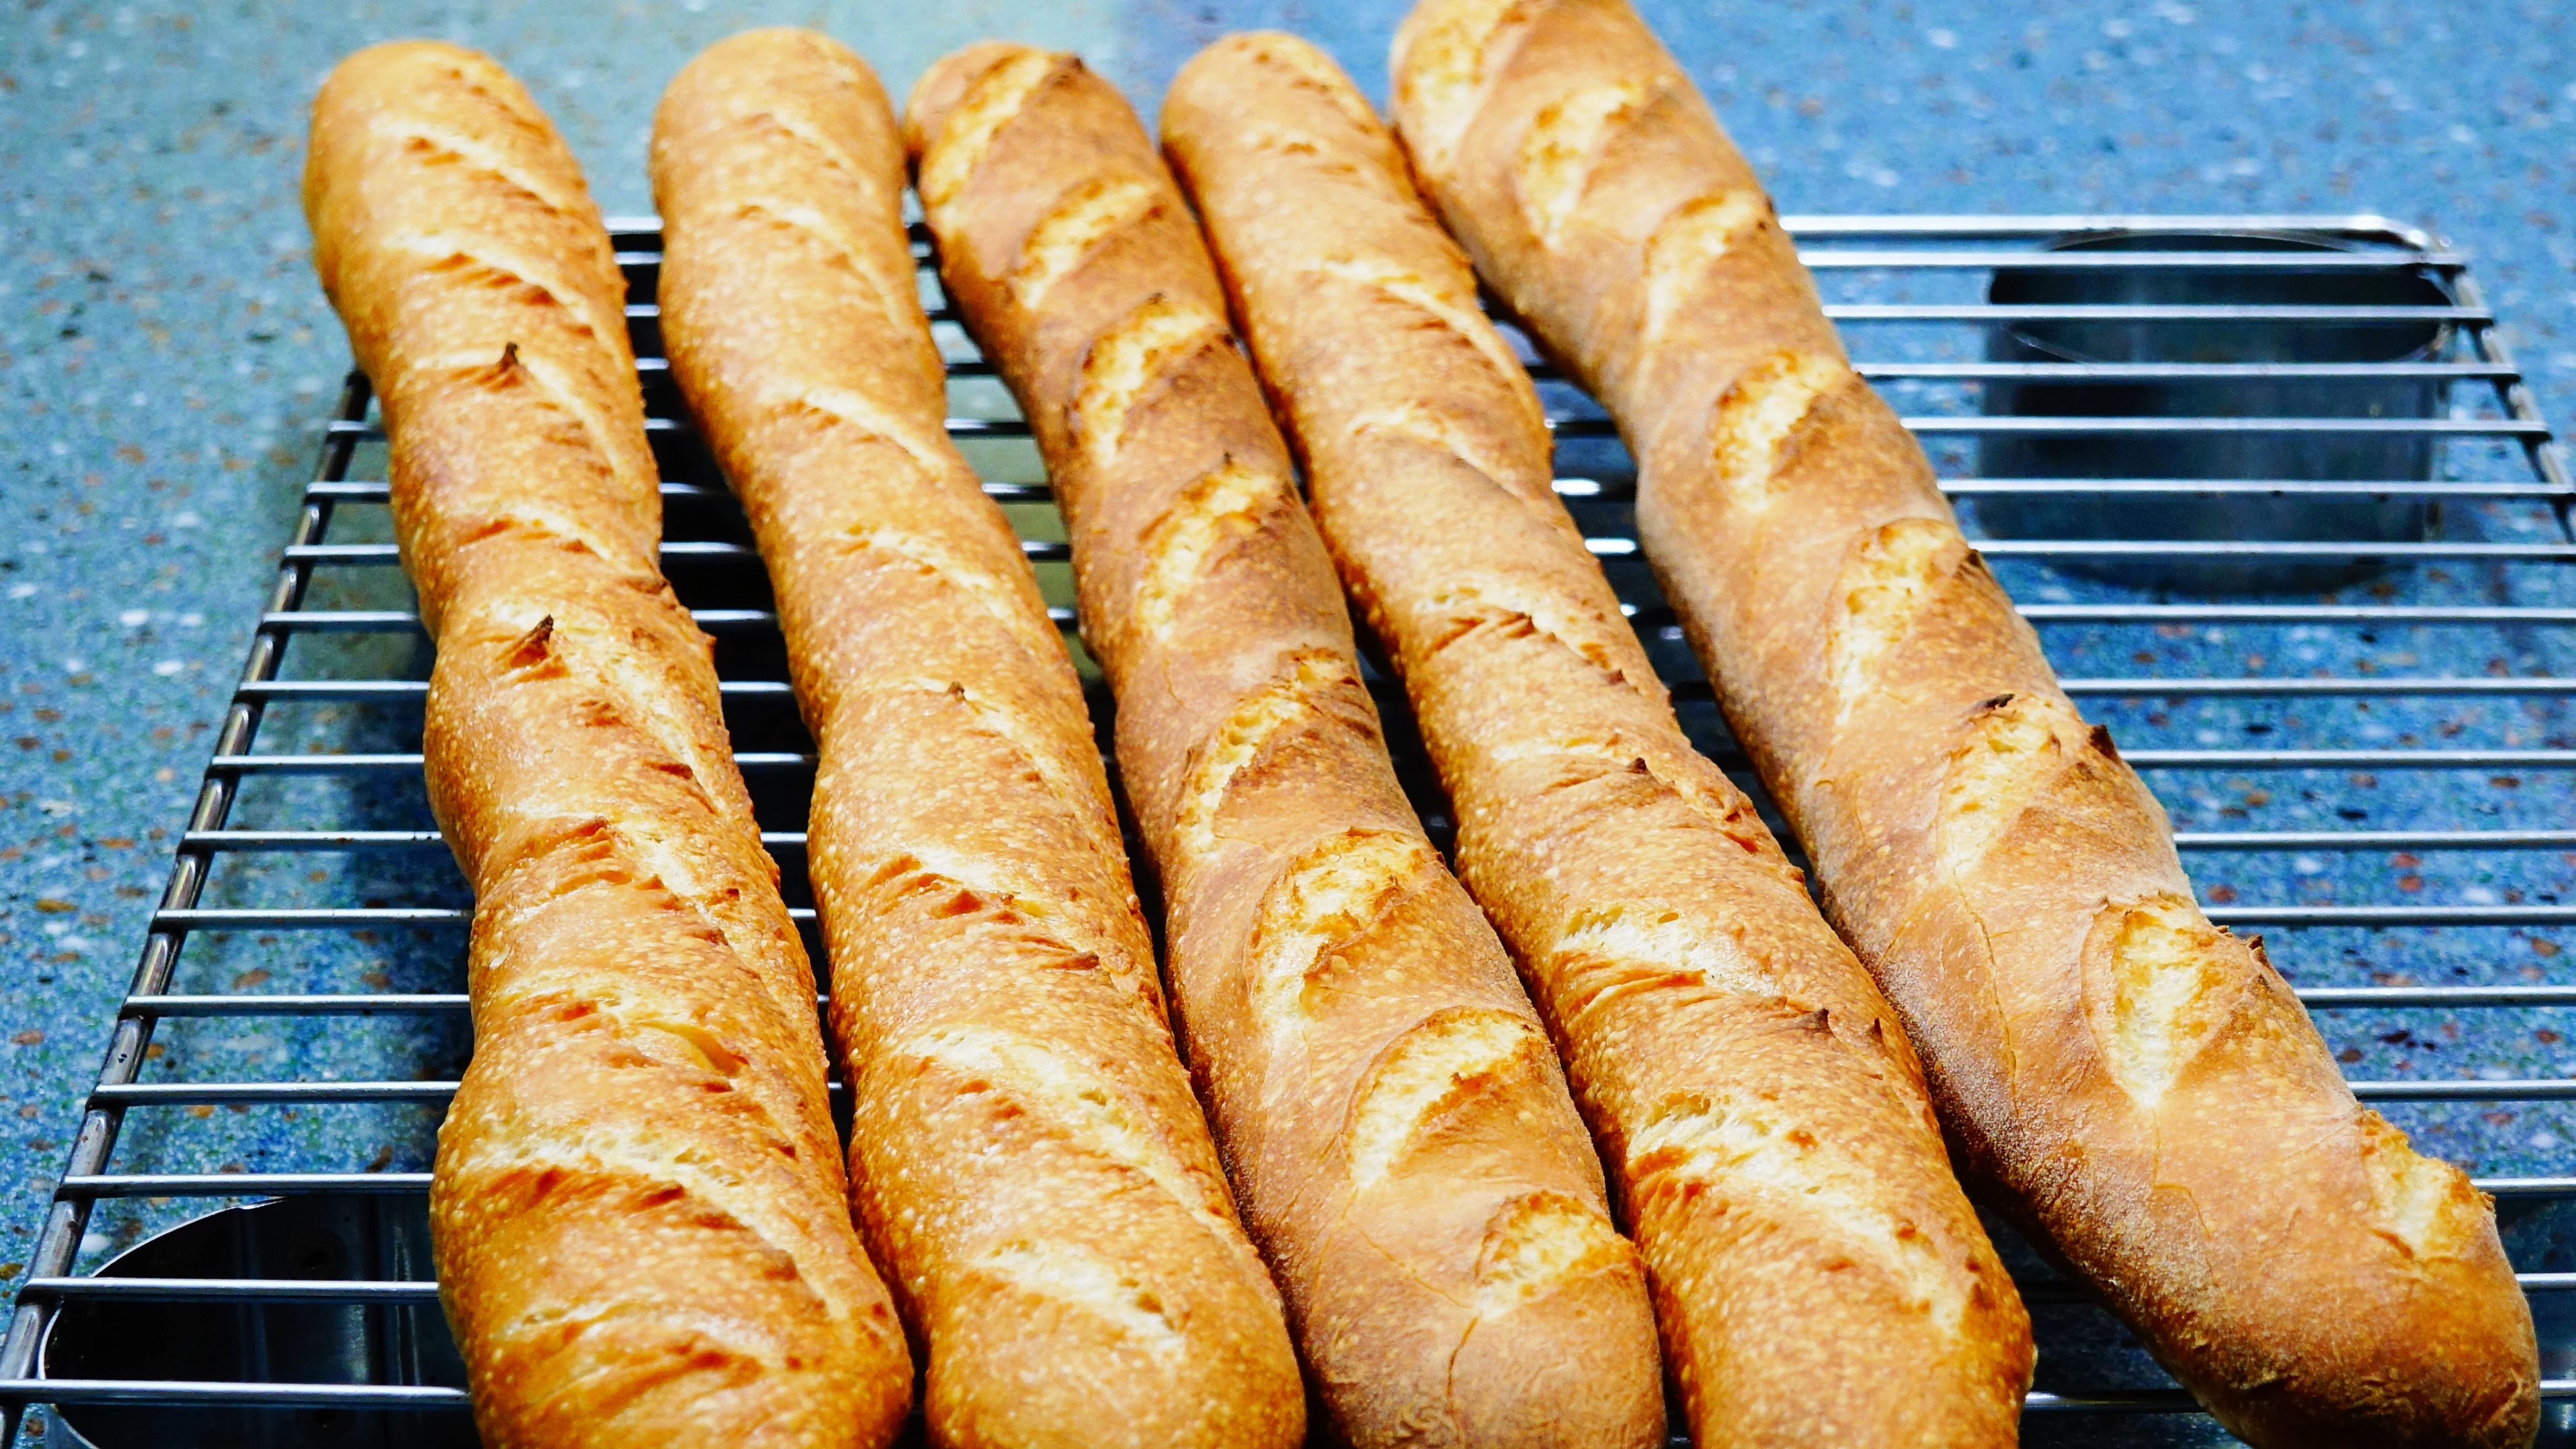 Baguette Recipe - Real French Baguette by Video Culinary